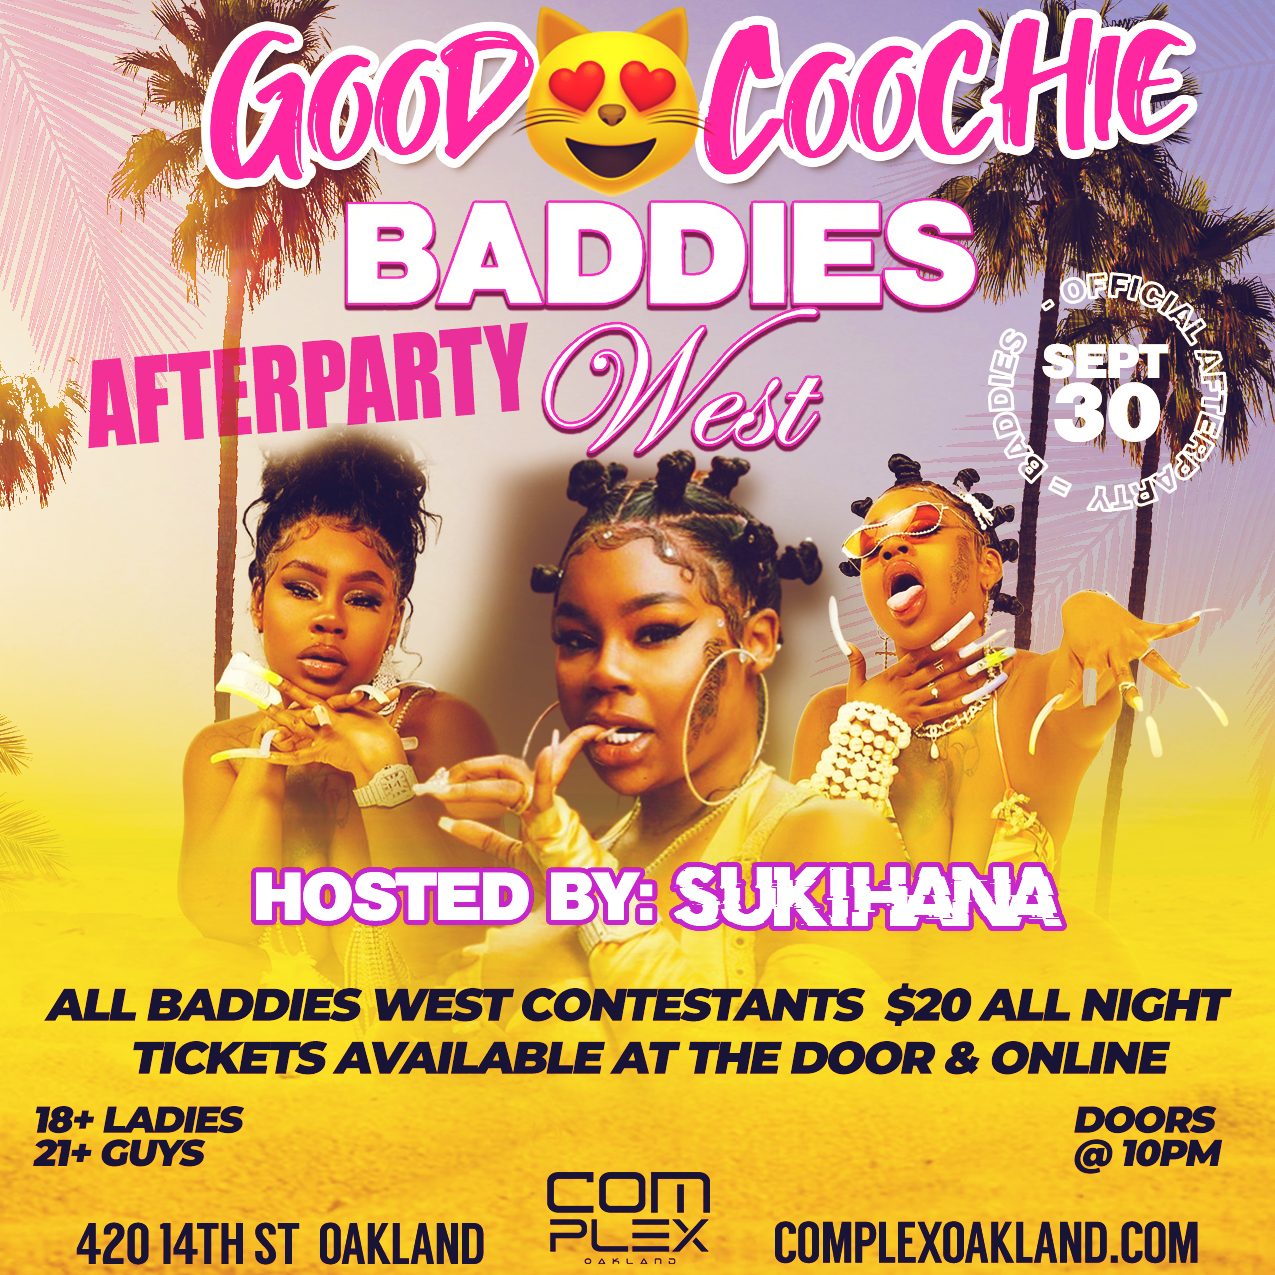 Buy Tickets to SUKIHANA (BADDIES WEST AFTERPARTY) in Oakland on Sep 30